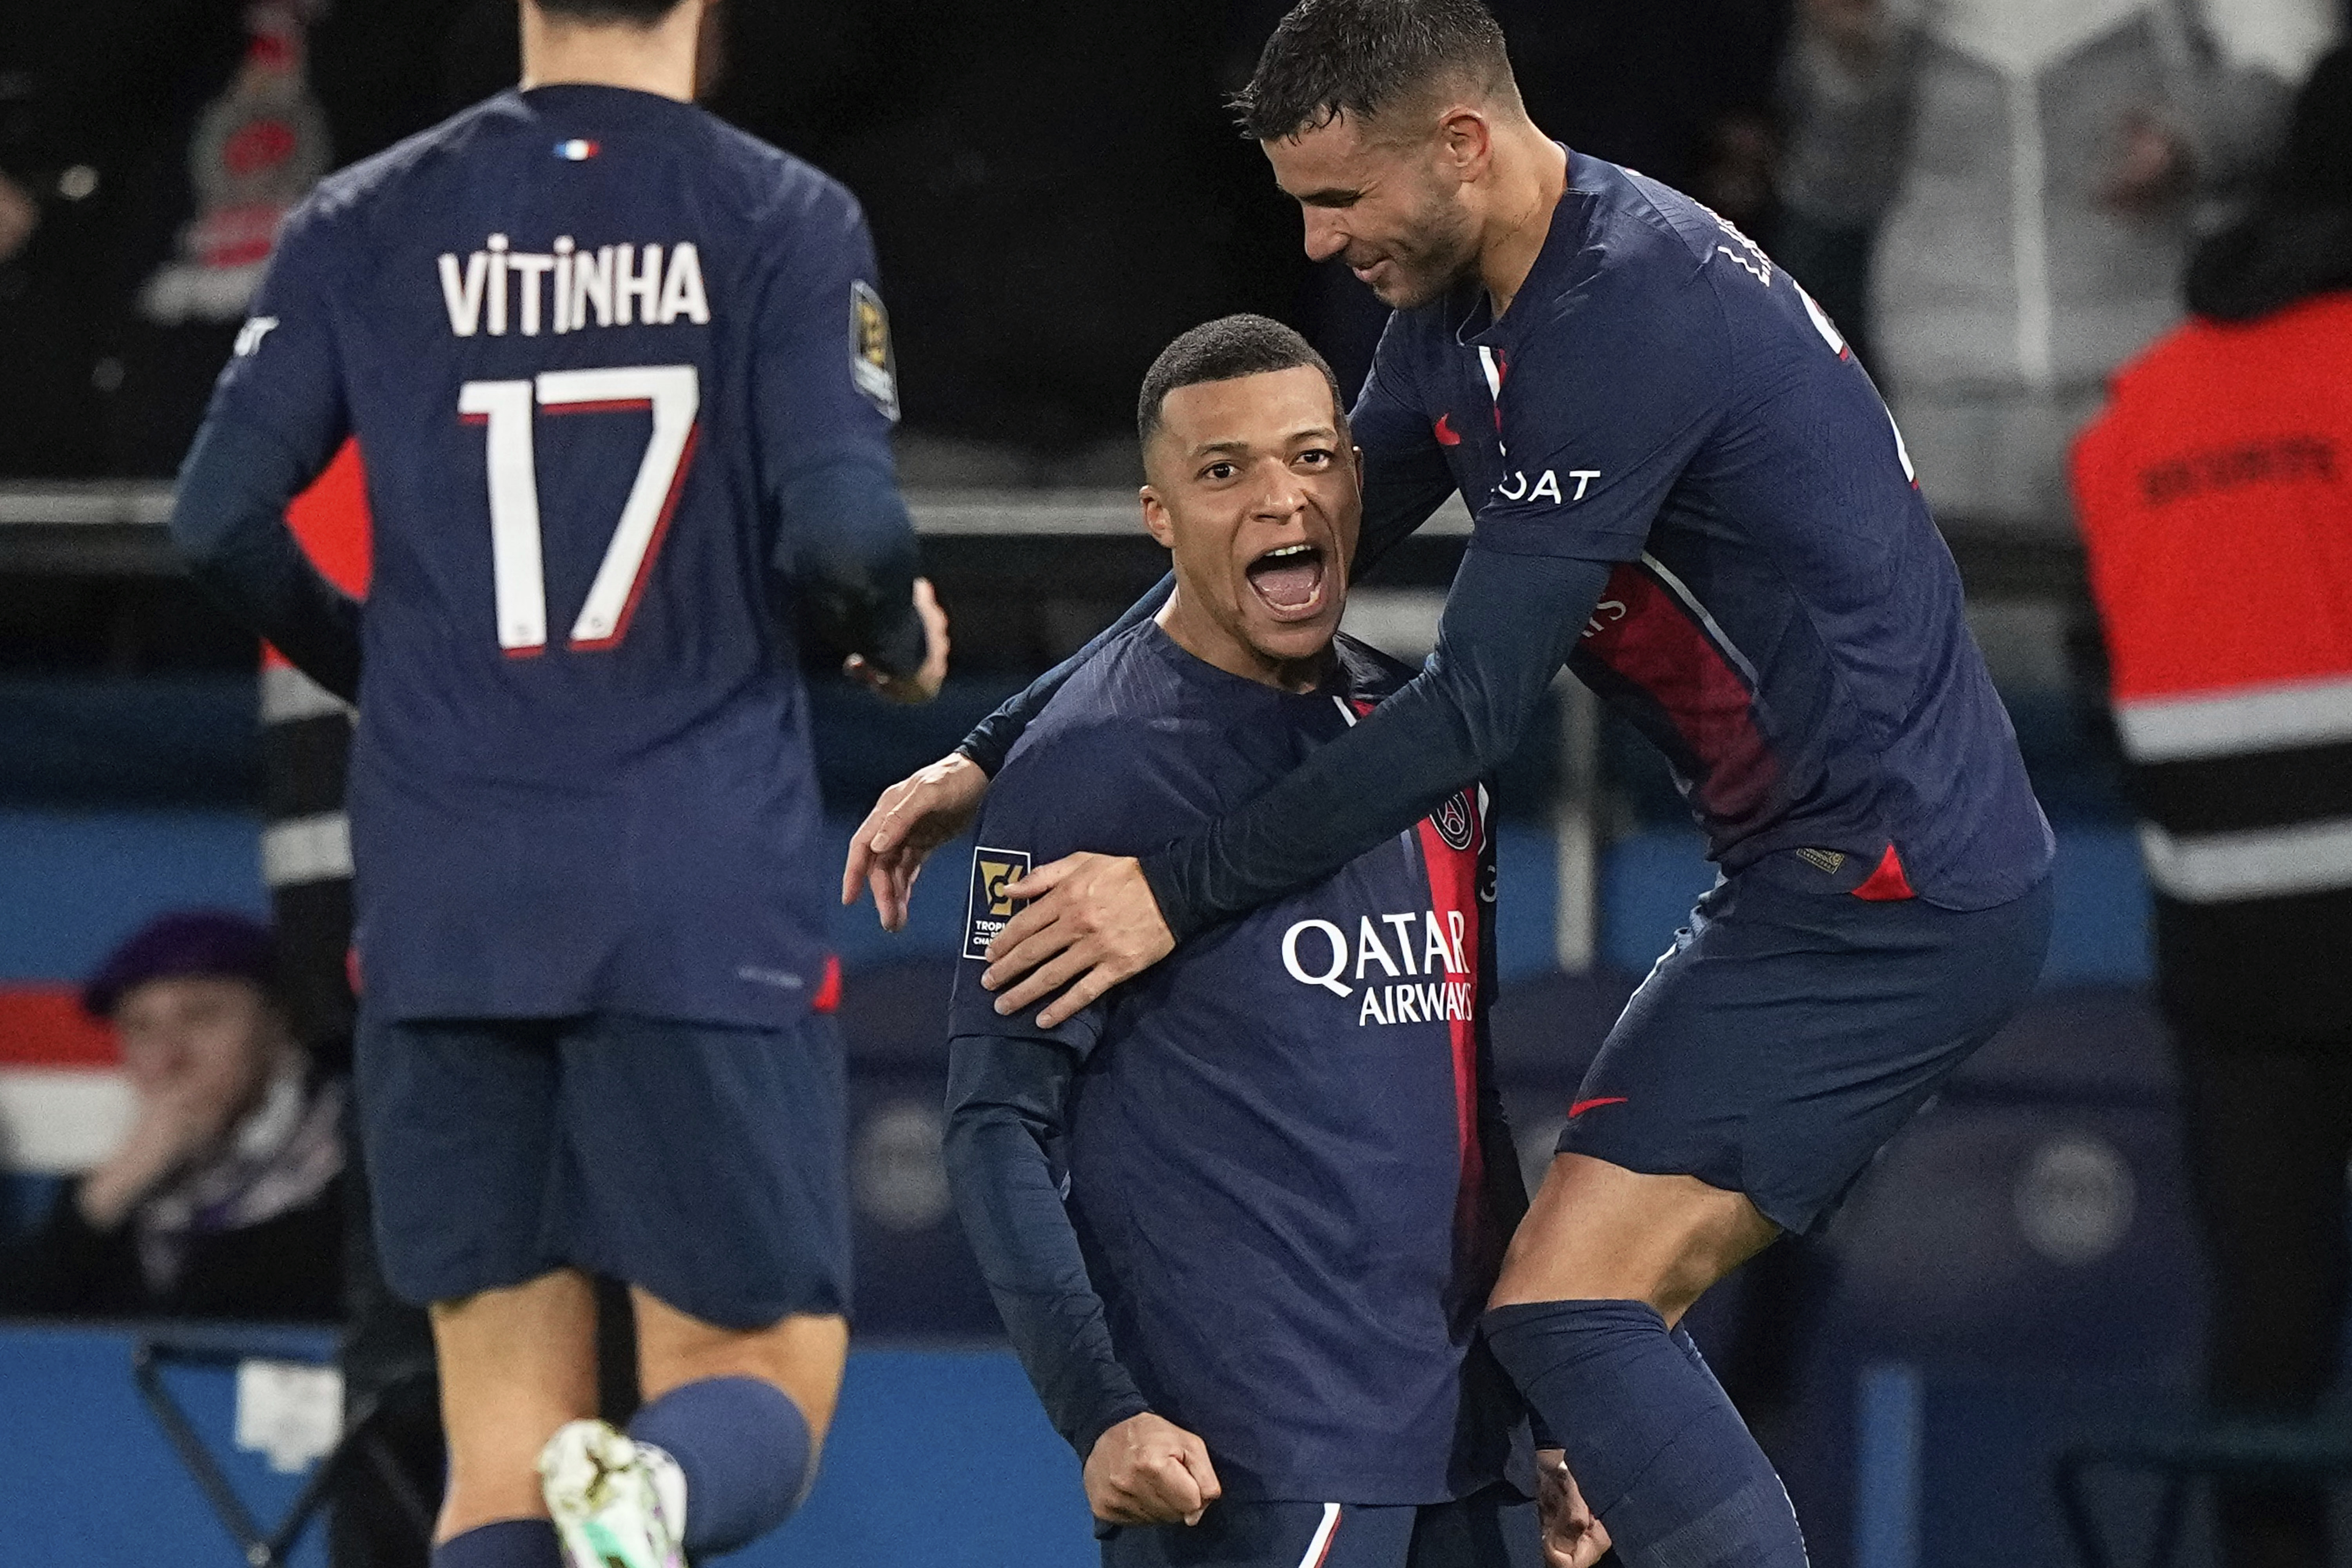 Kylian Mbappe scores superb solo goal for PSG in French Super Cup